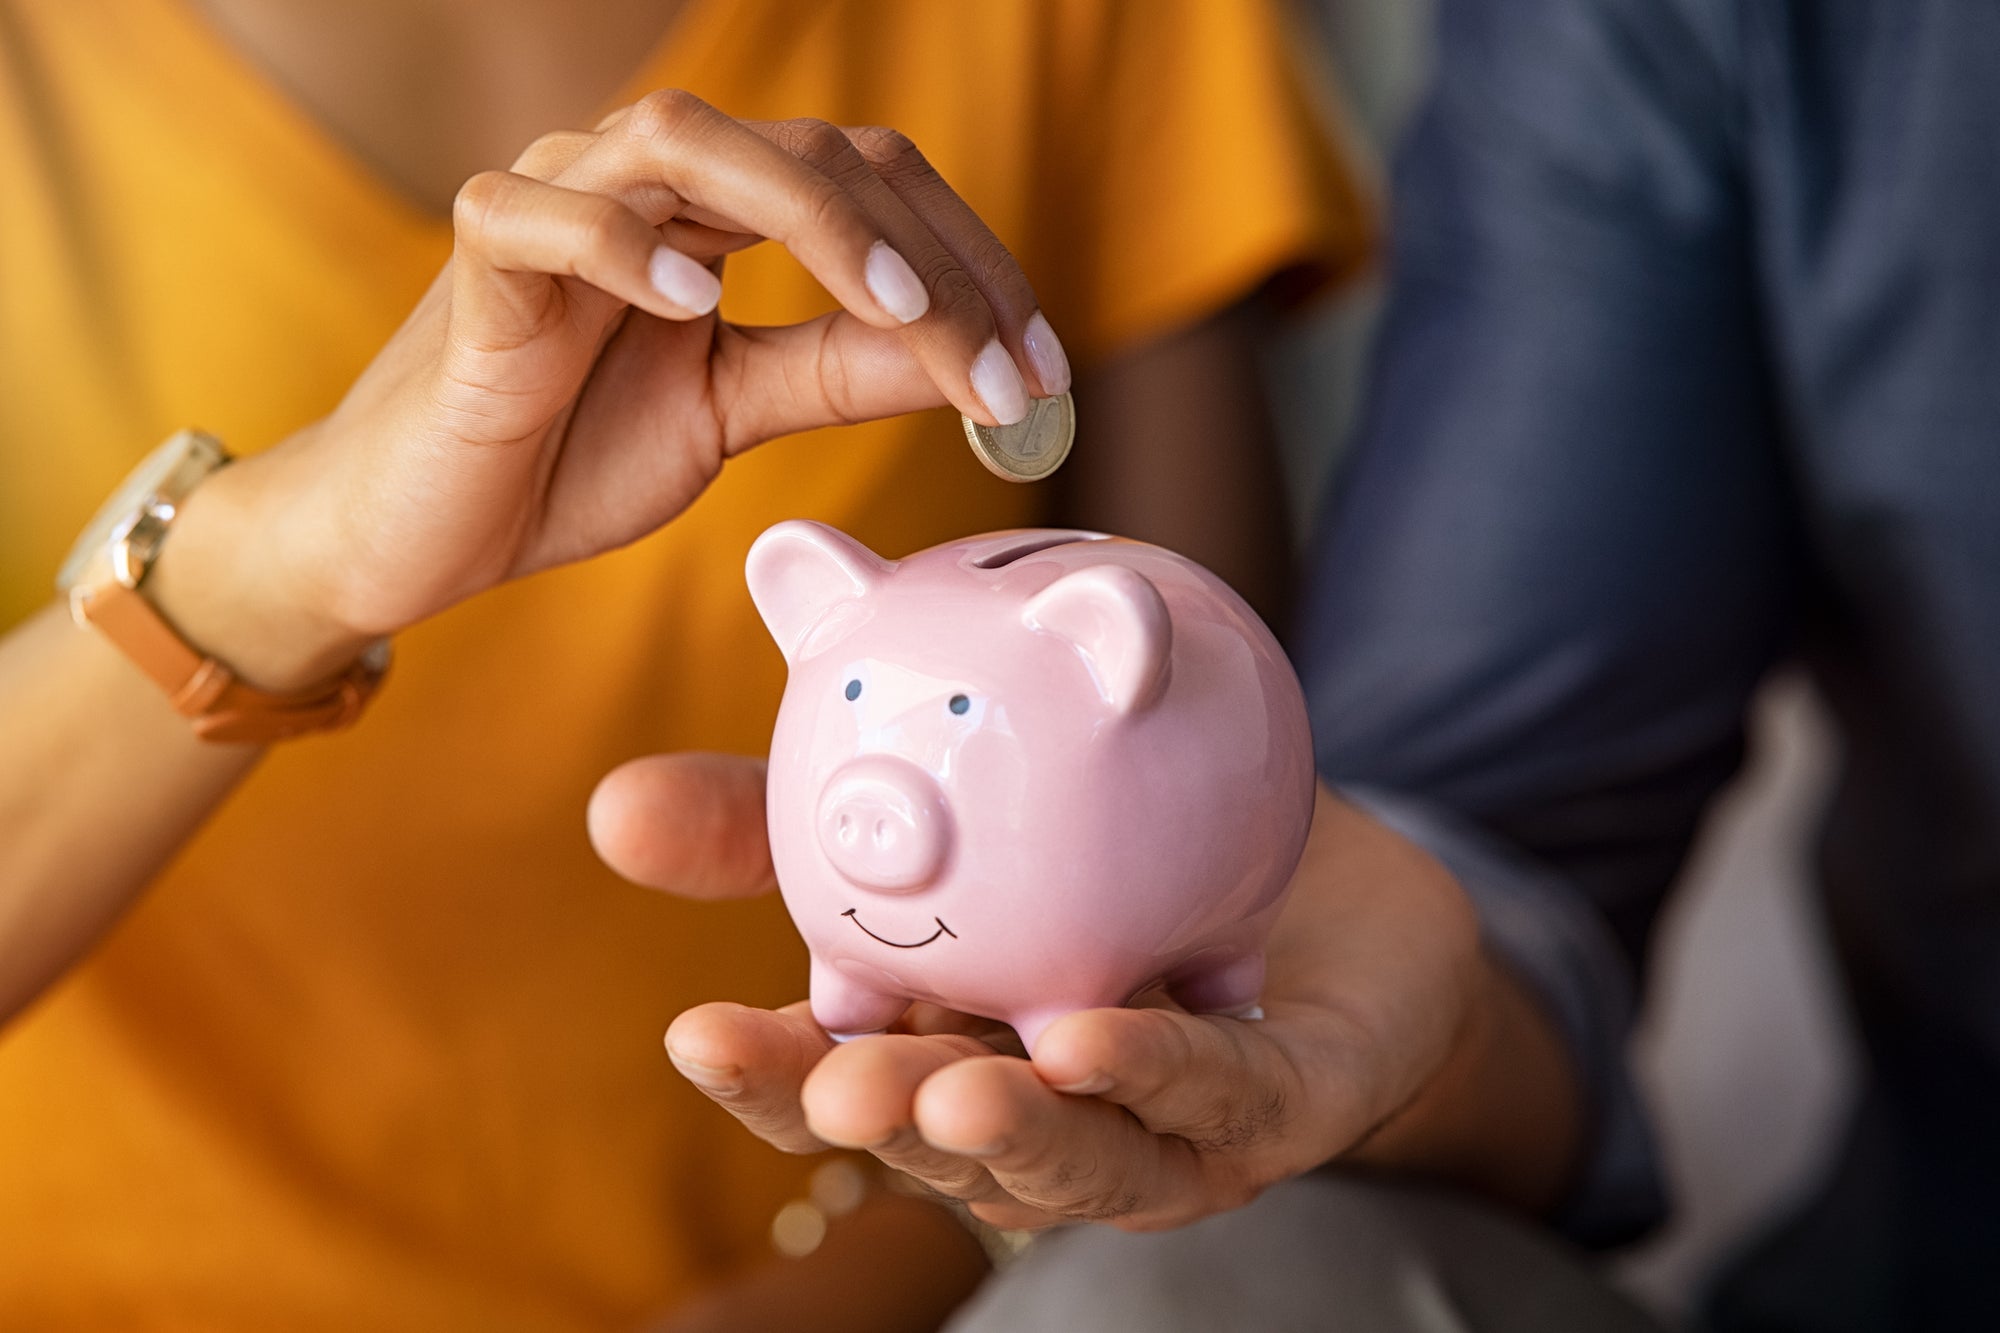 Man holding a piggy bank while woman puts coins in it